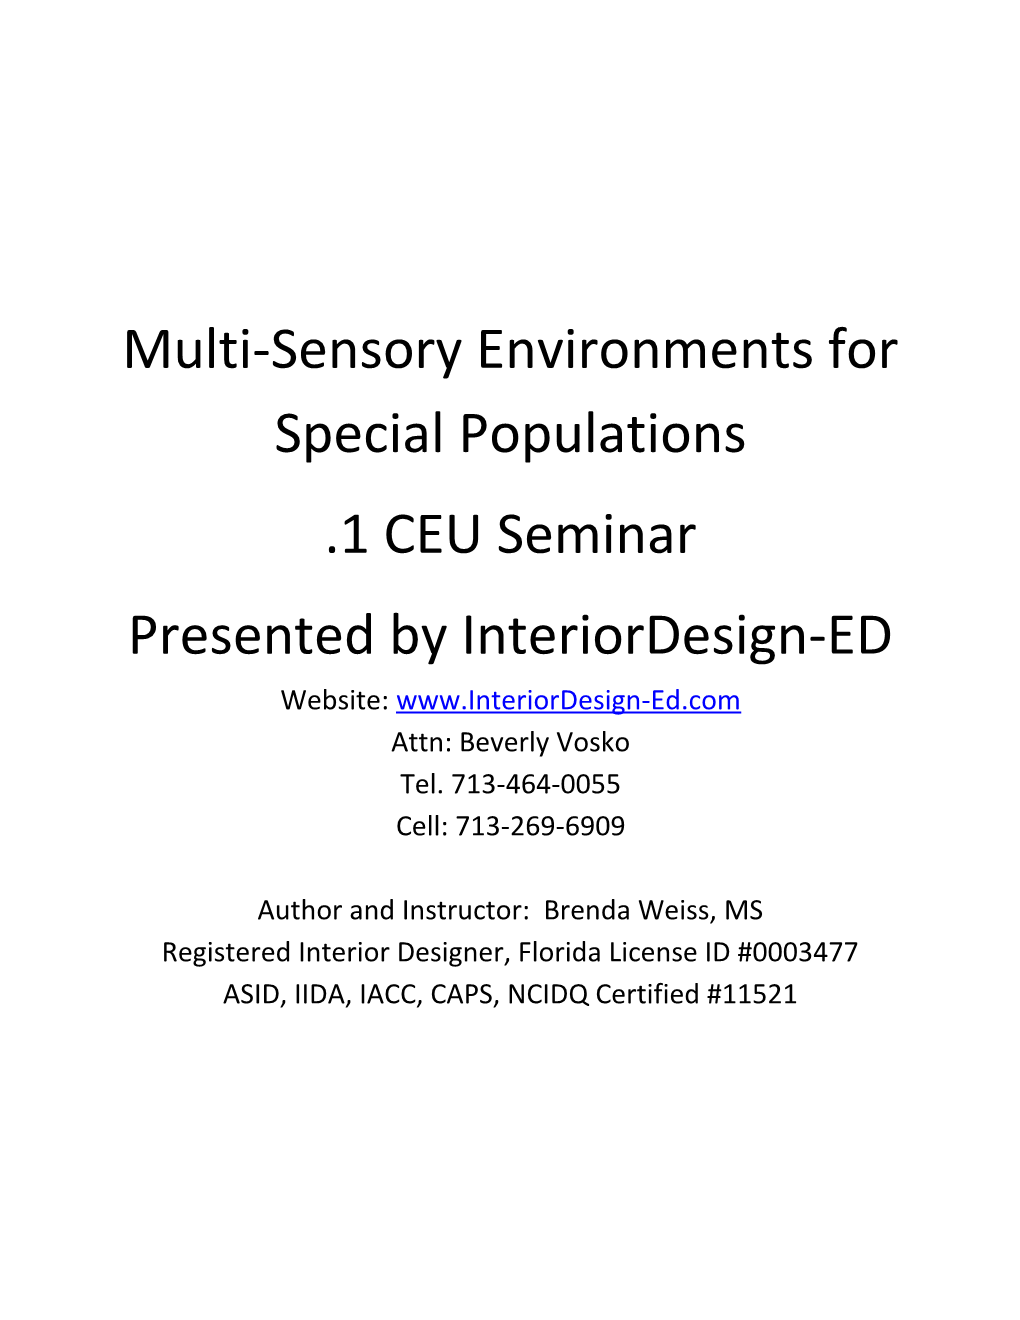 Multi-Sensory Environments for Special Populations